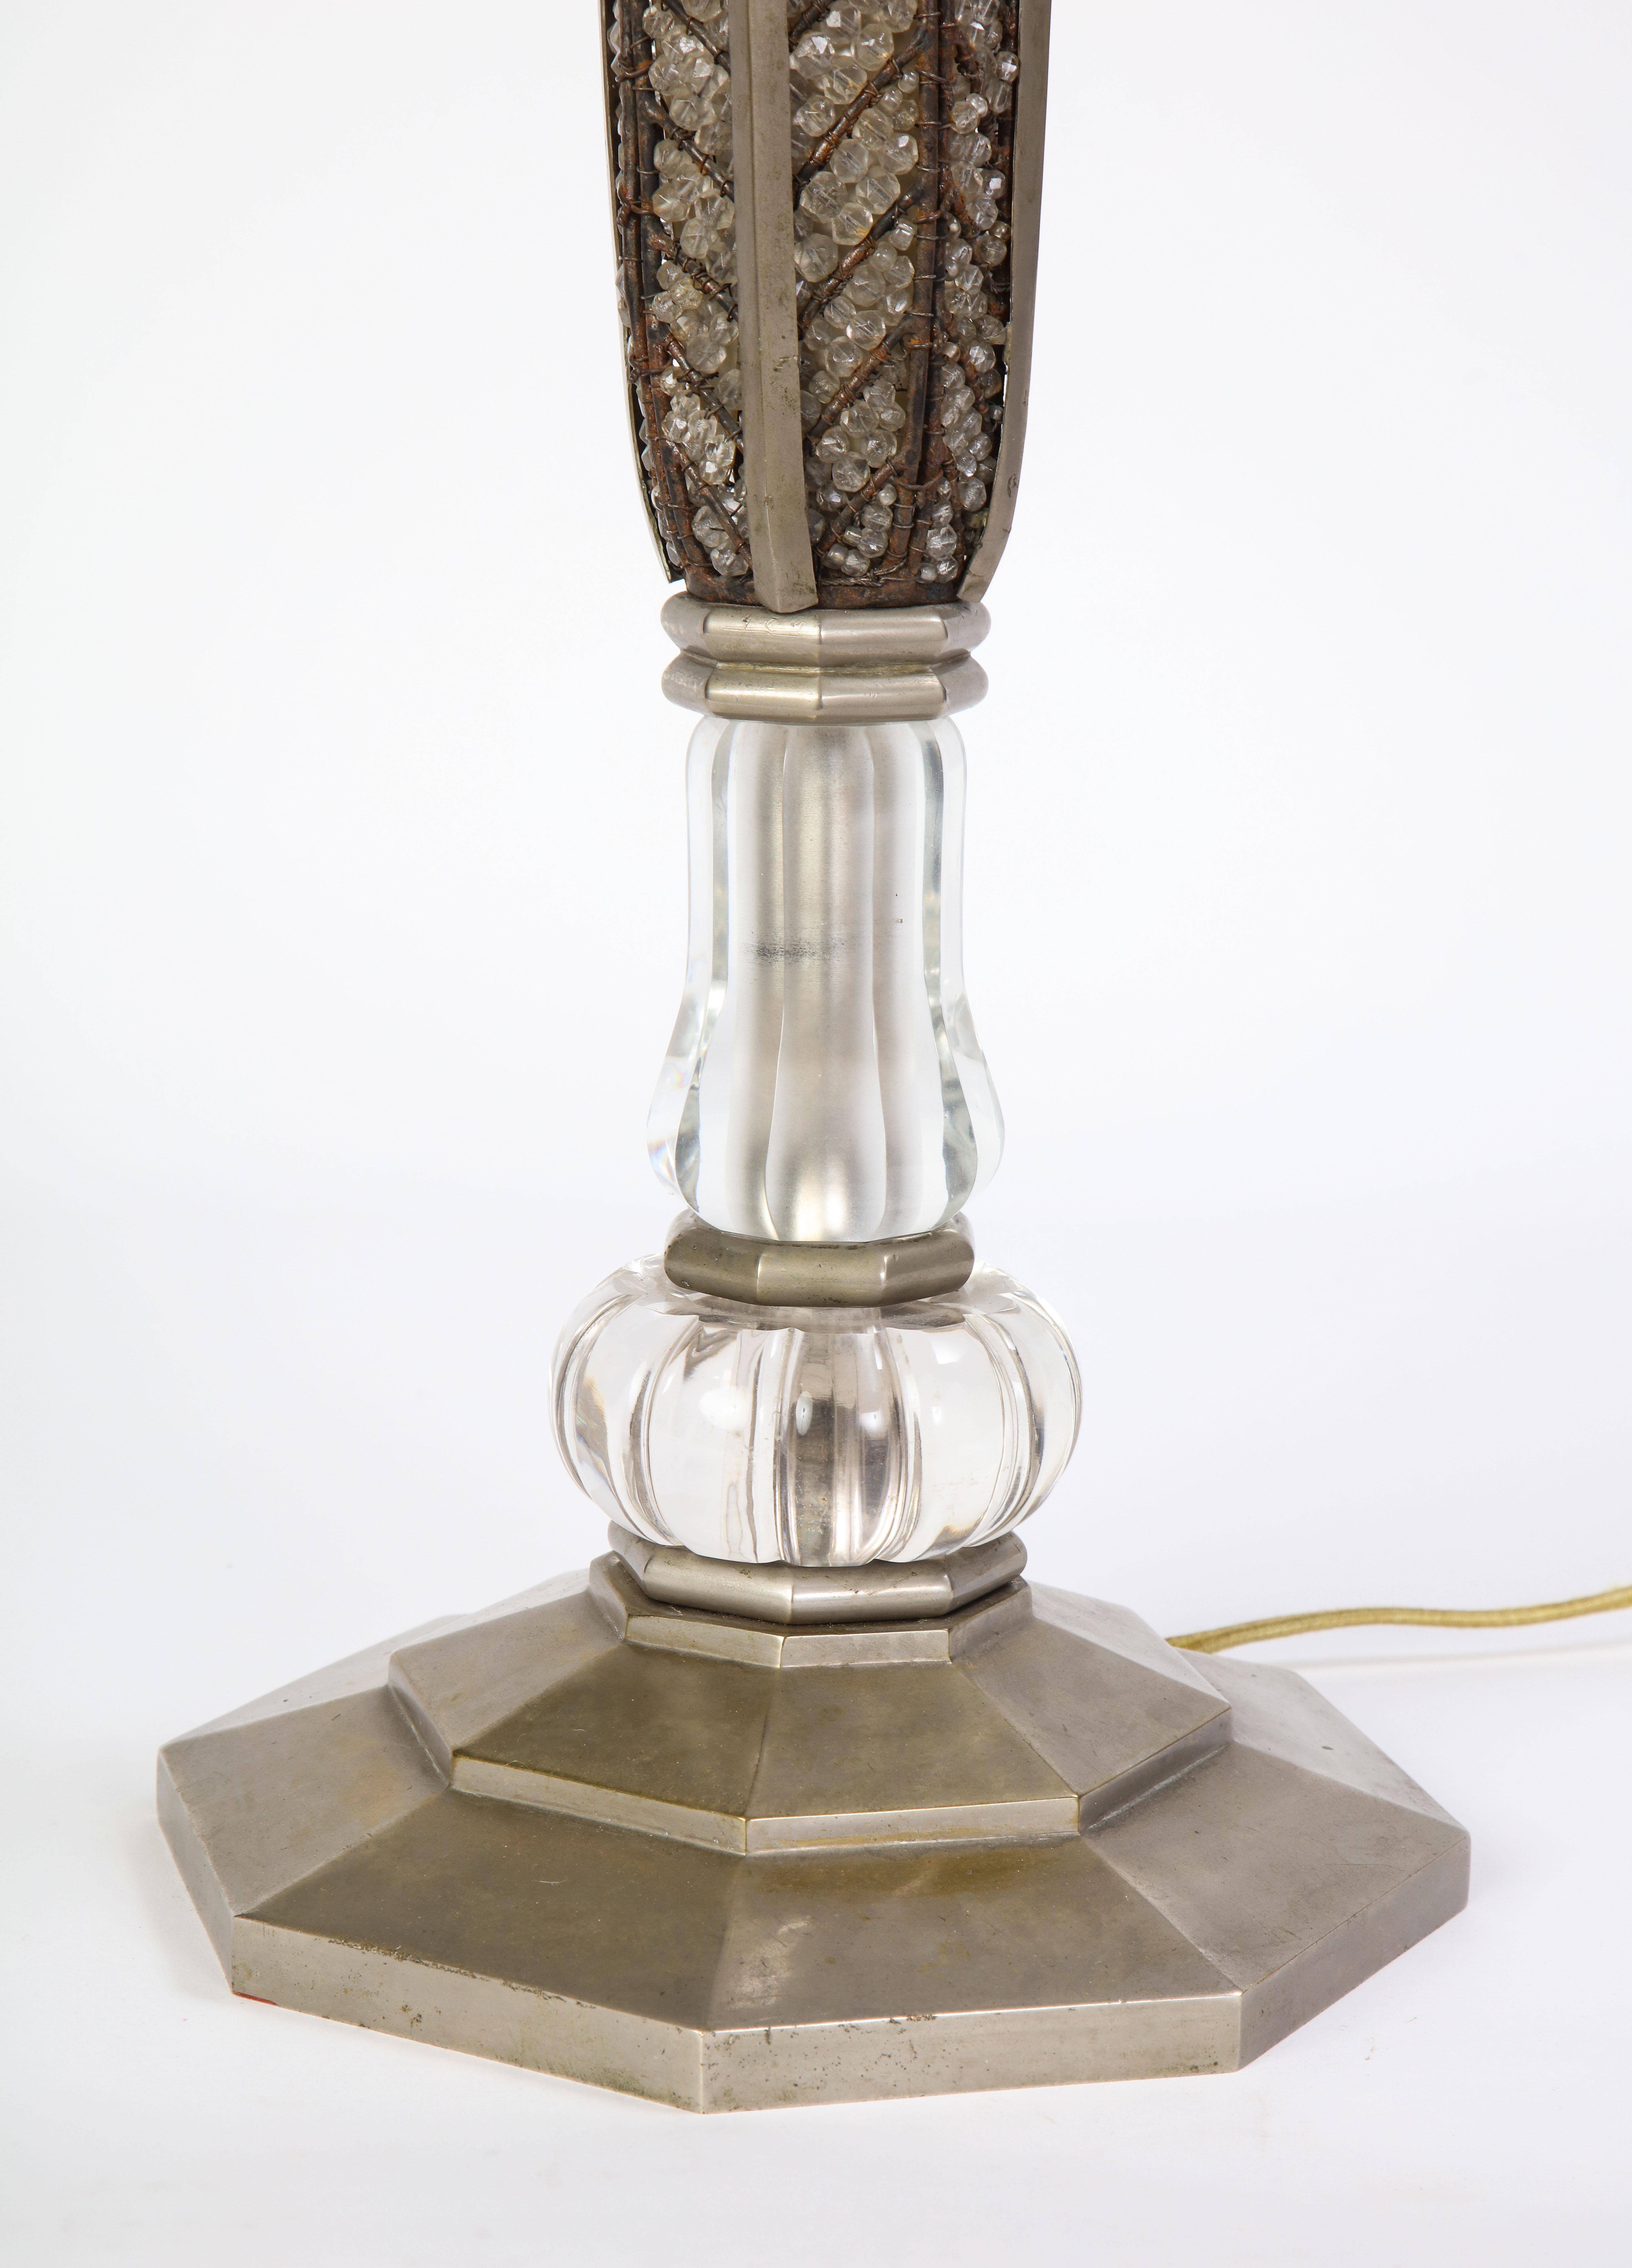 French Beaded Glass Table Lamp, Attributed To Maison Bagues, Circa 1925 For Sale 3